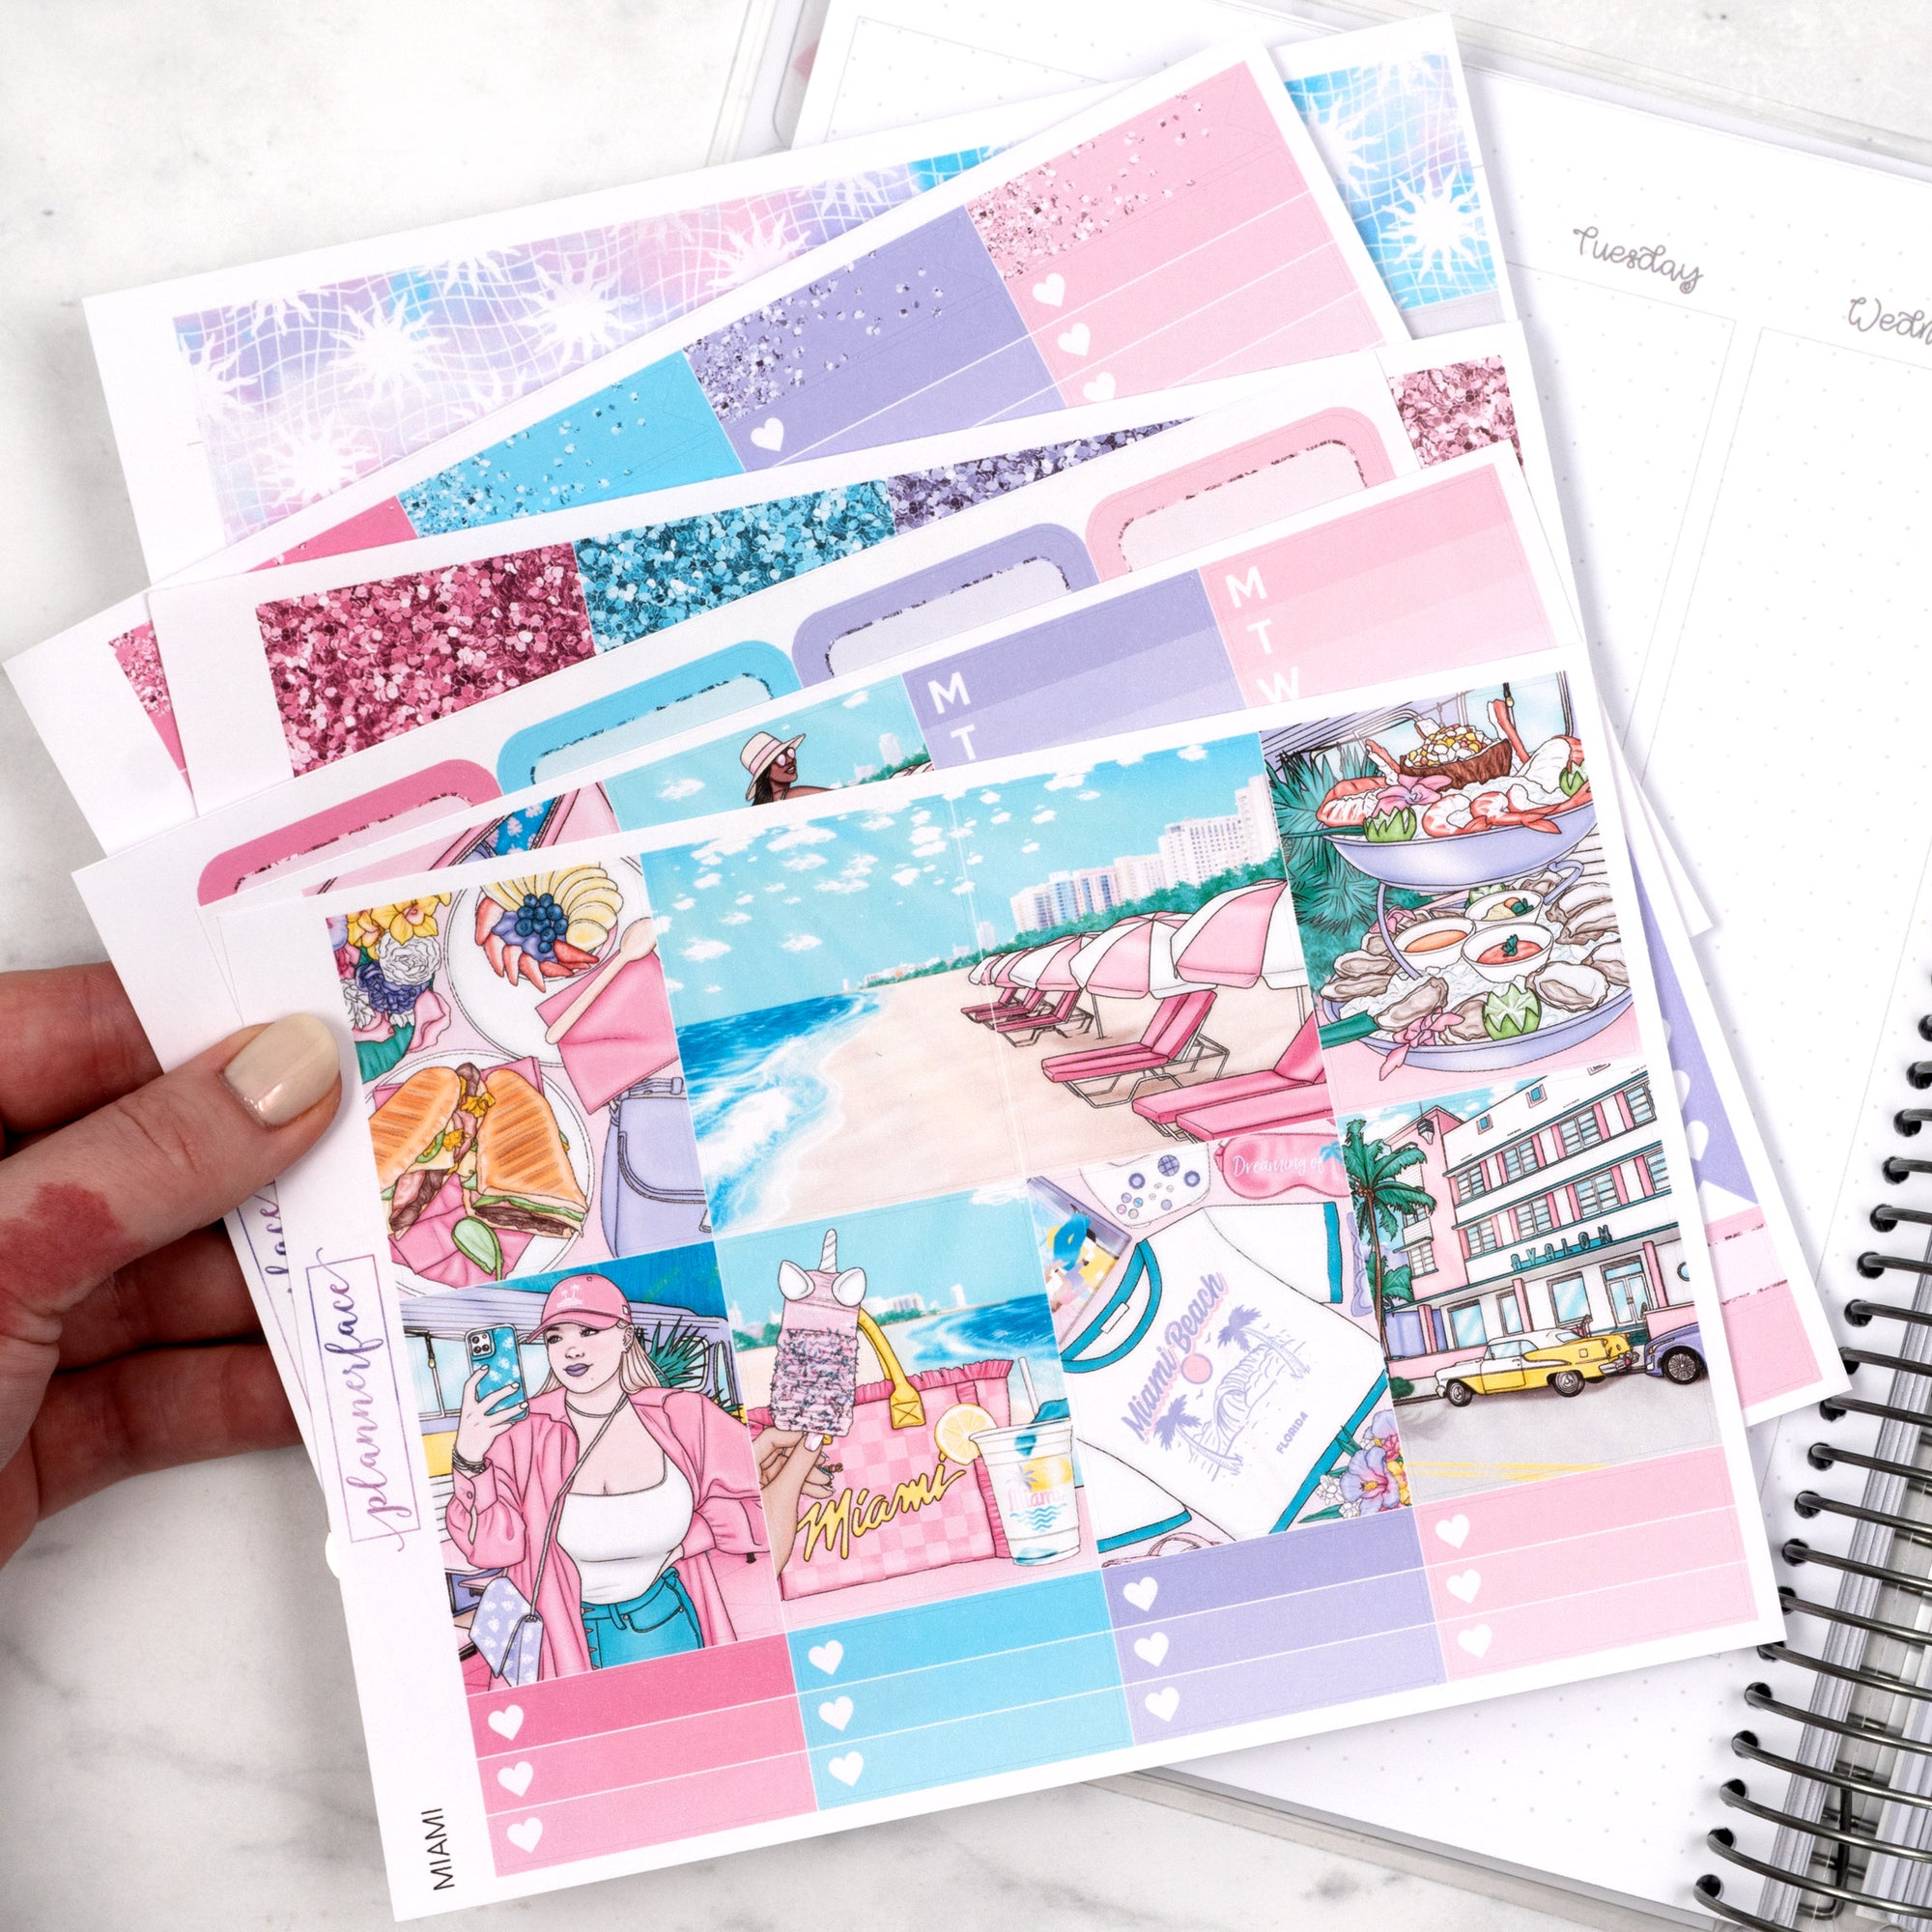 How to Actually Use a Weekly Sticker Kit for Planning